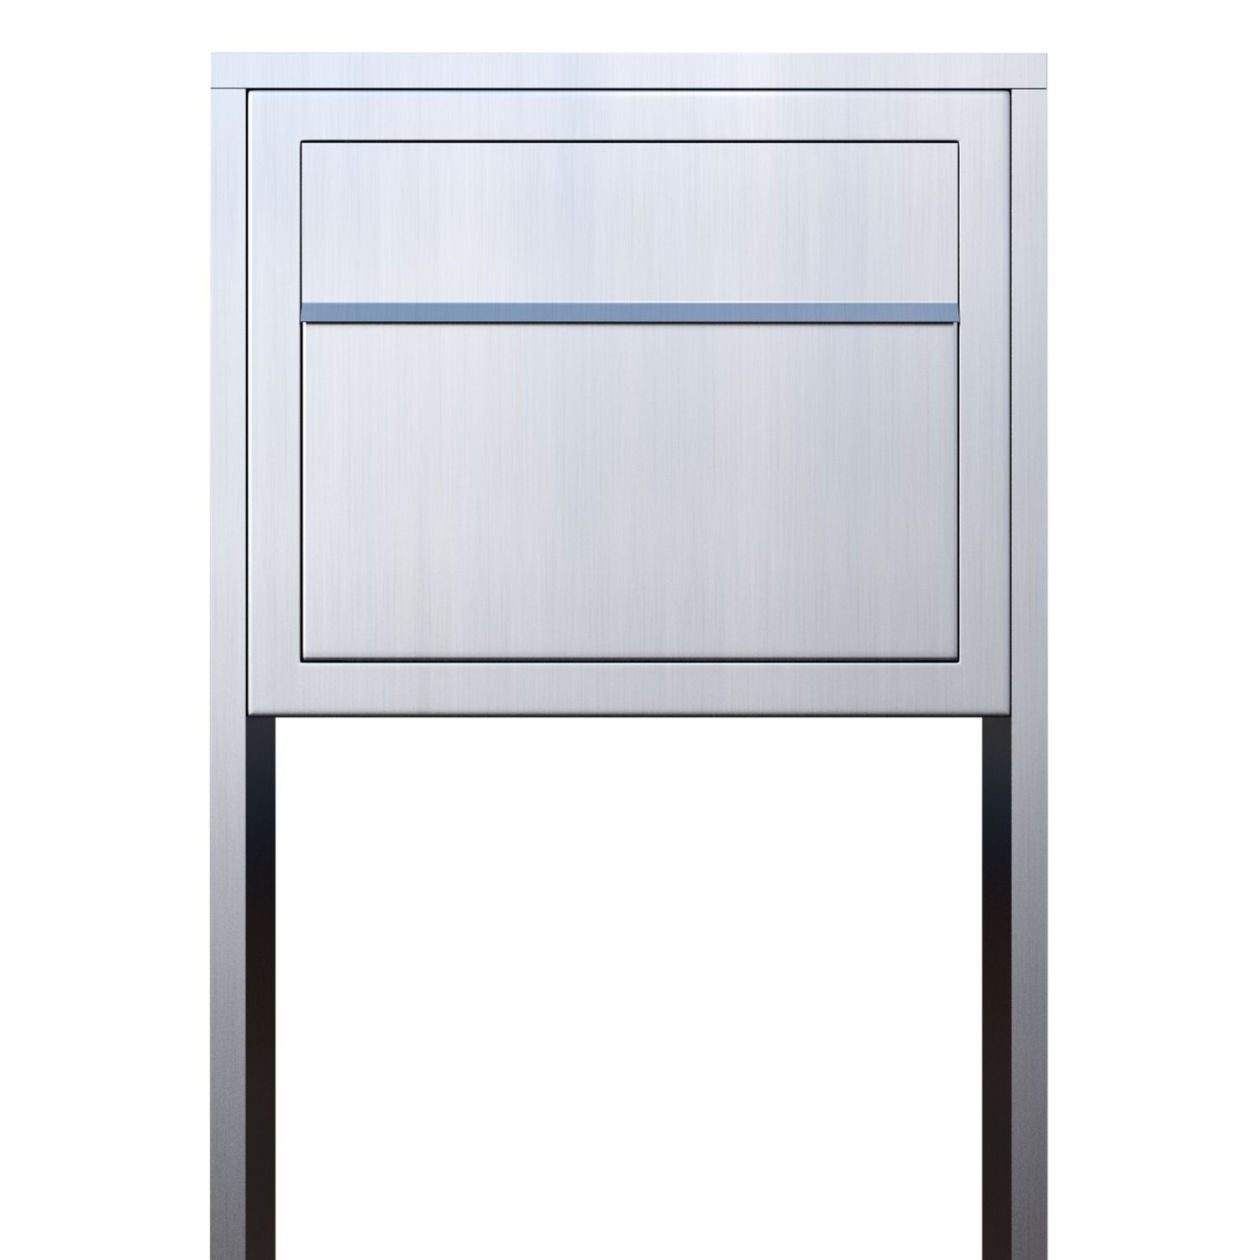 STAND ELEGANCE by Bravios - Modern post-mounted stainless steel mailbox